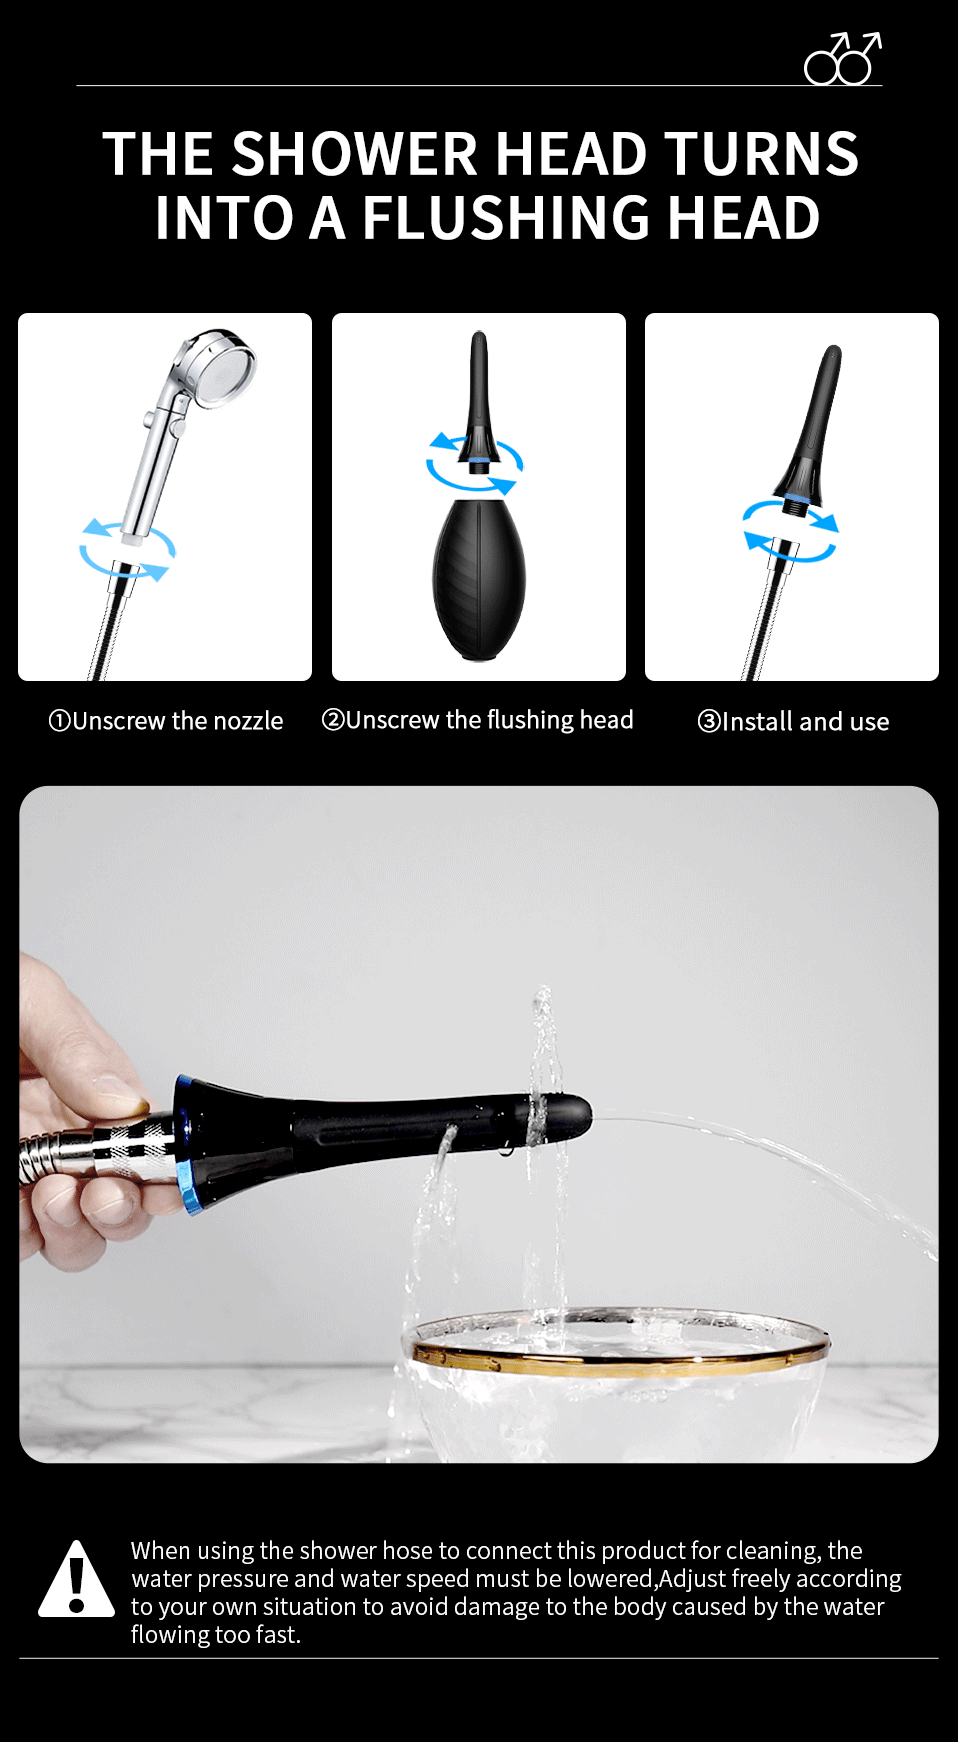 Hands-free anal douche for men and women, easy to use when connected to a shower. The interface diameter is 20mm ( 0.79 inches), fit for most showers.